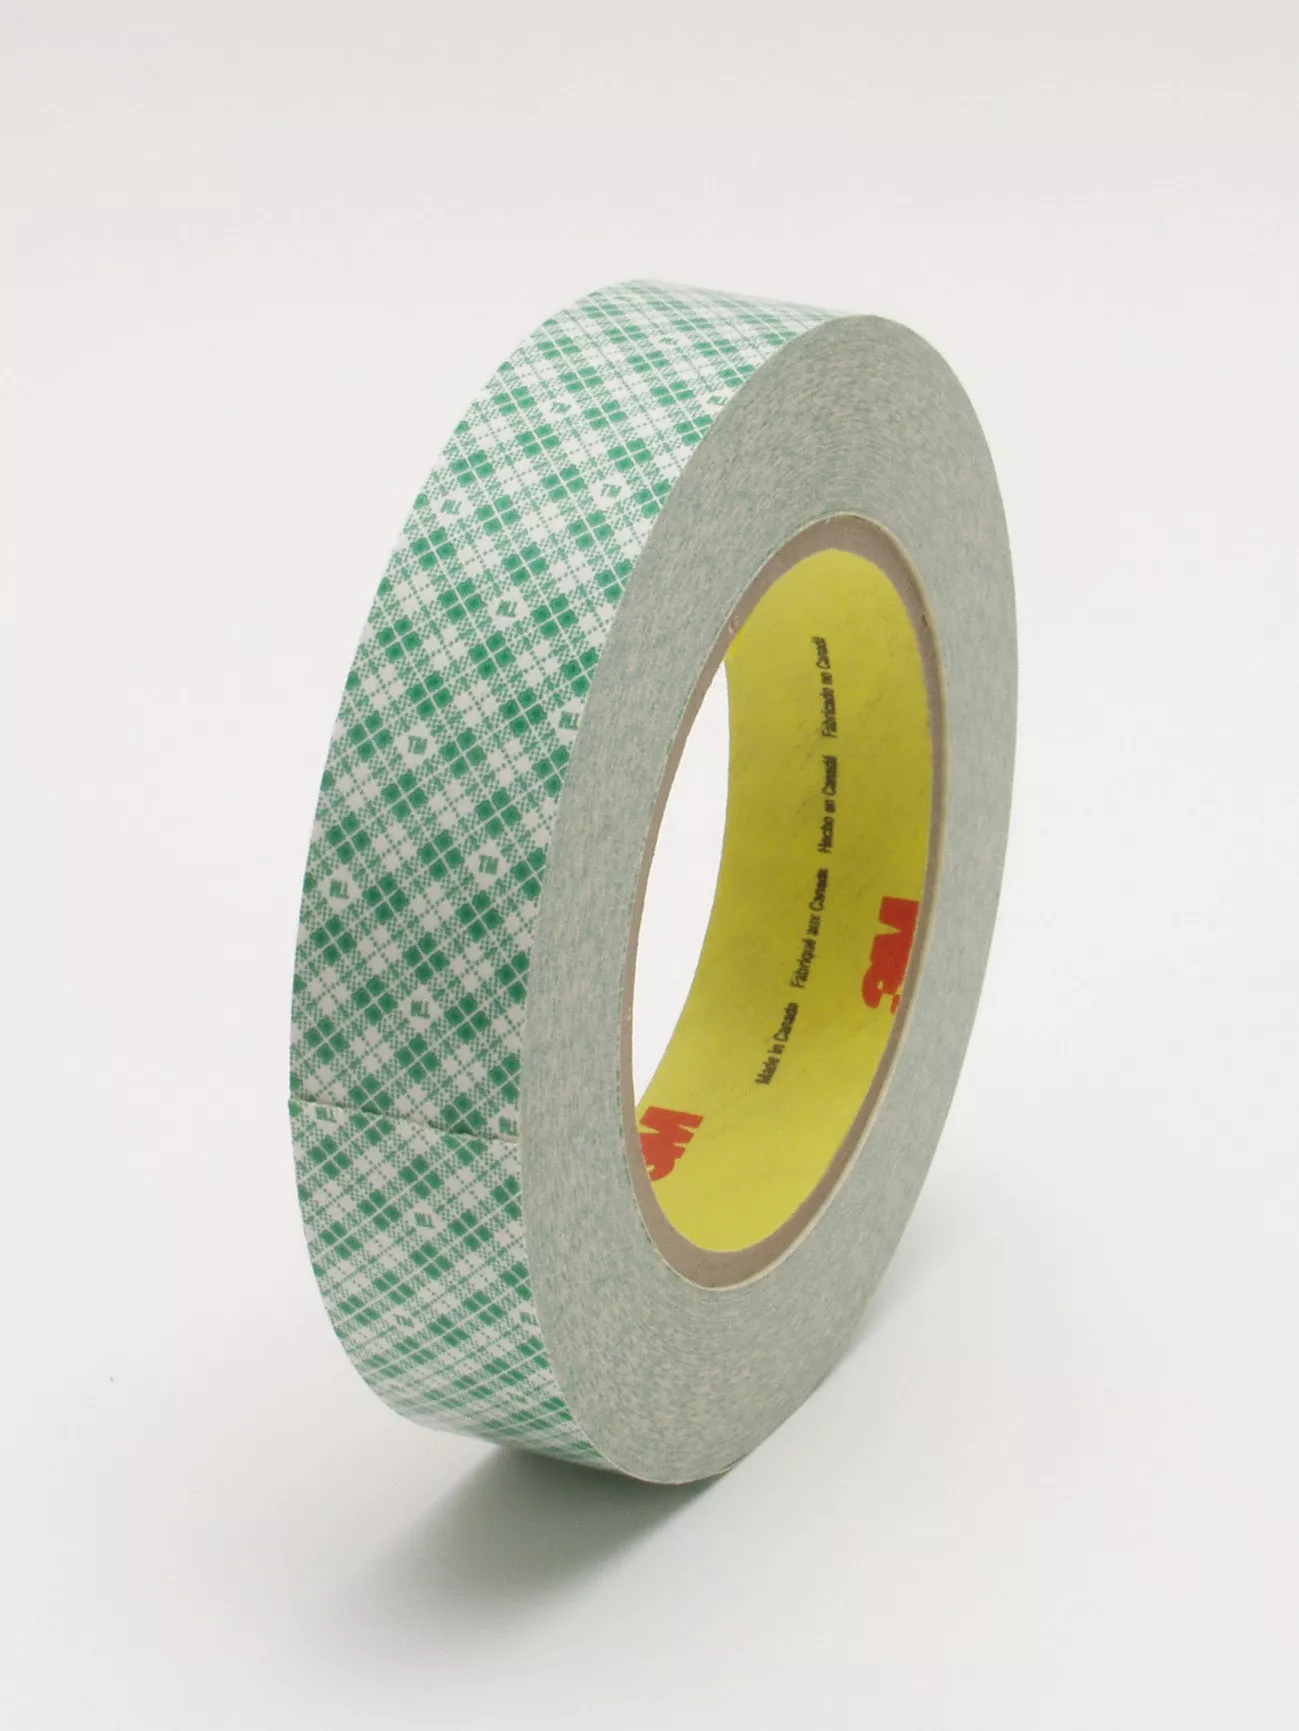 SKU 7010373963 | 3M™ Double Coated Paper Tape 410M